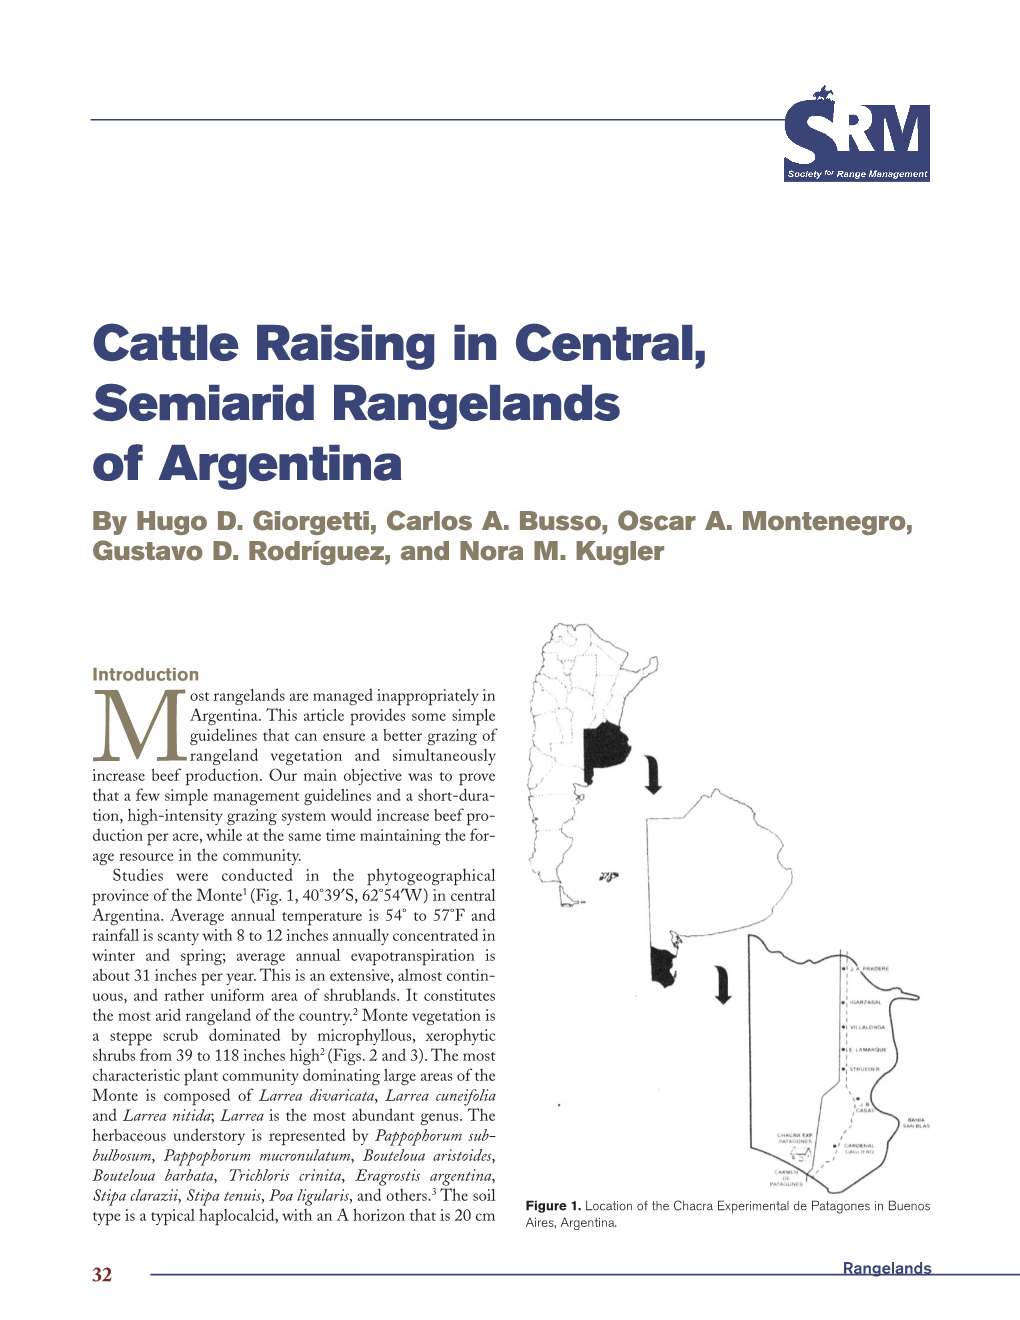 Cattle Raising in Central, Semiarid Rangelands of Argentina by Hugo D